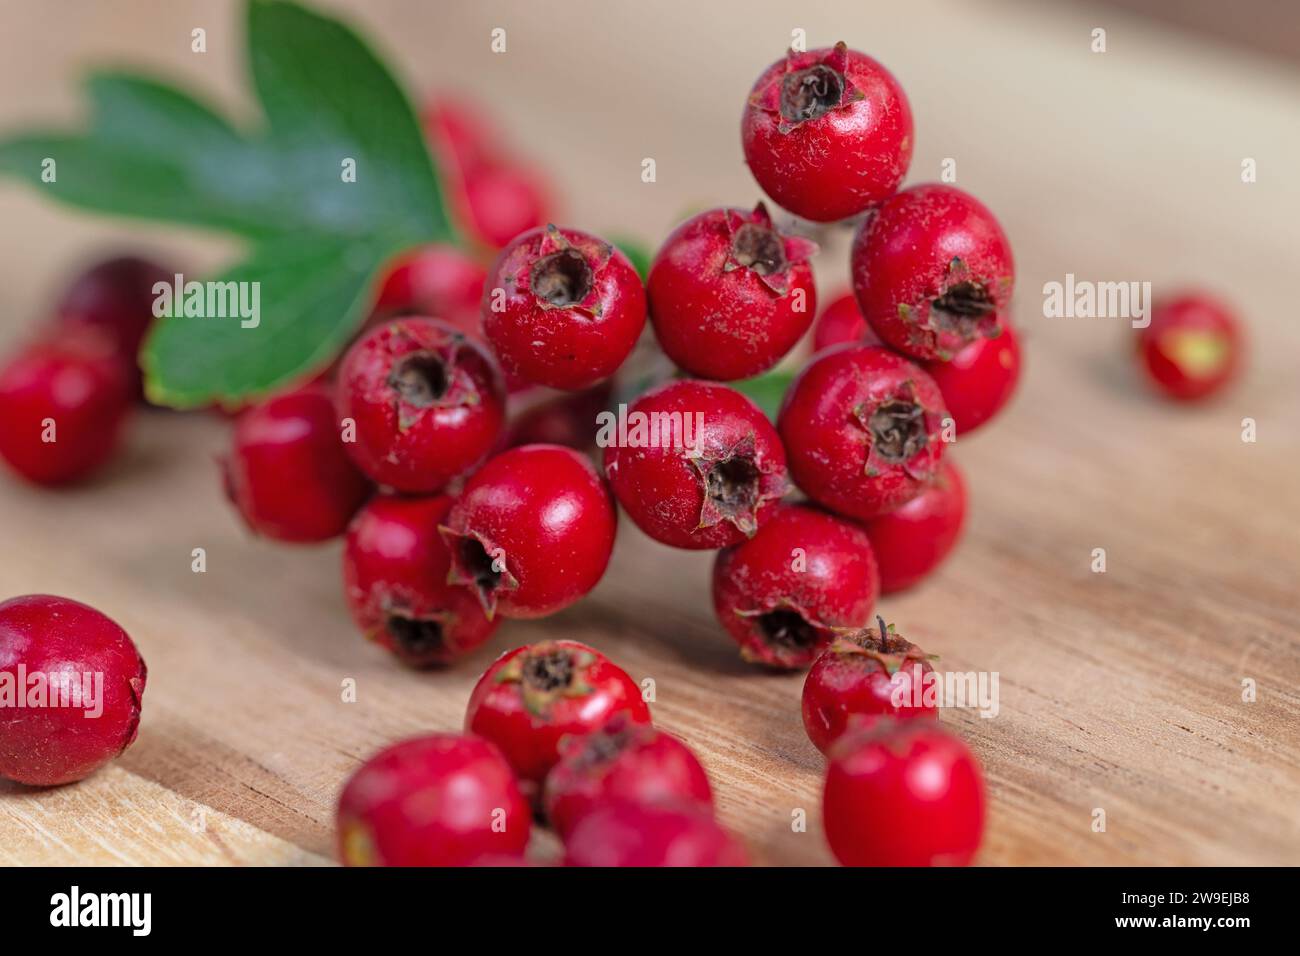 Hawthorn fruits in a close-up Stock Photo